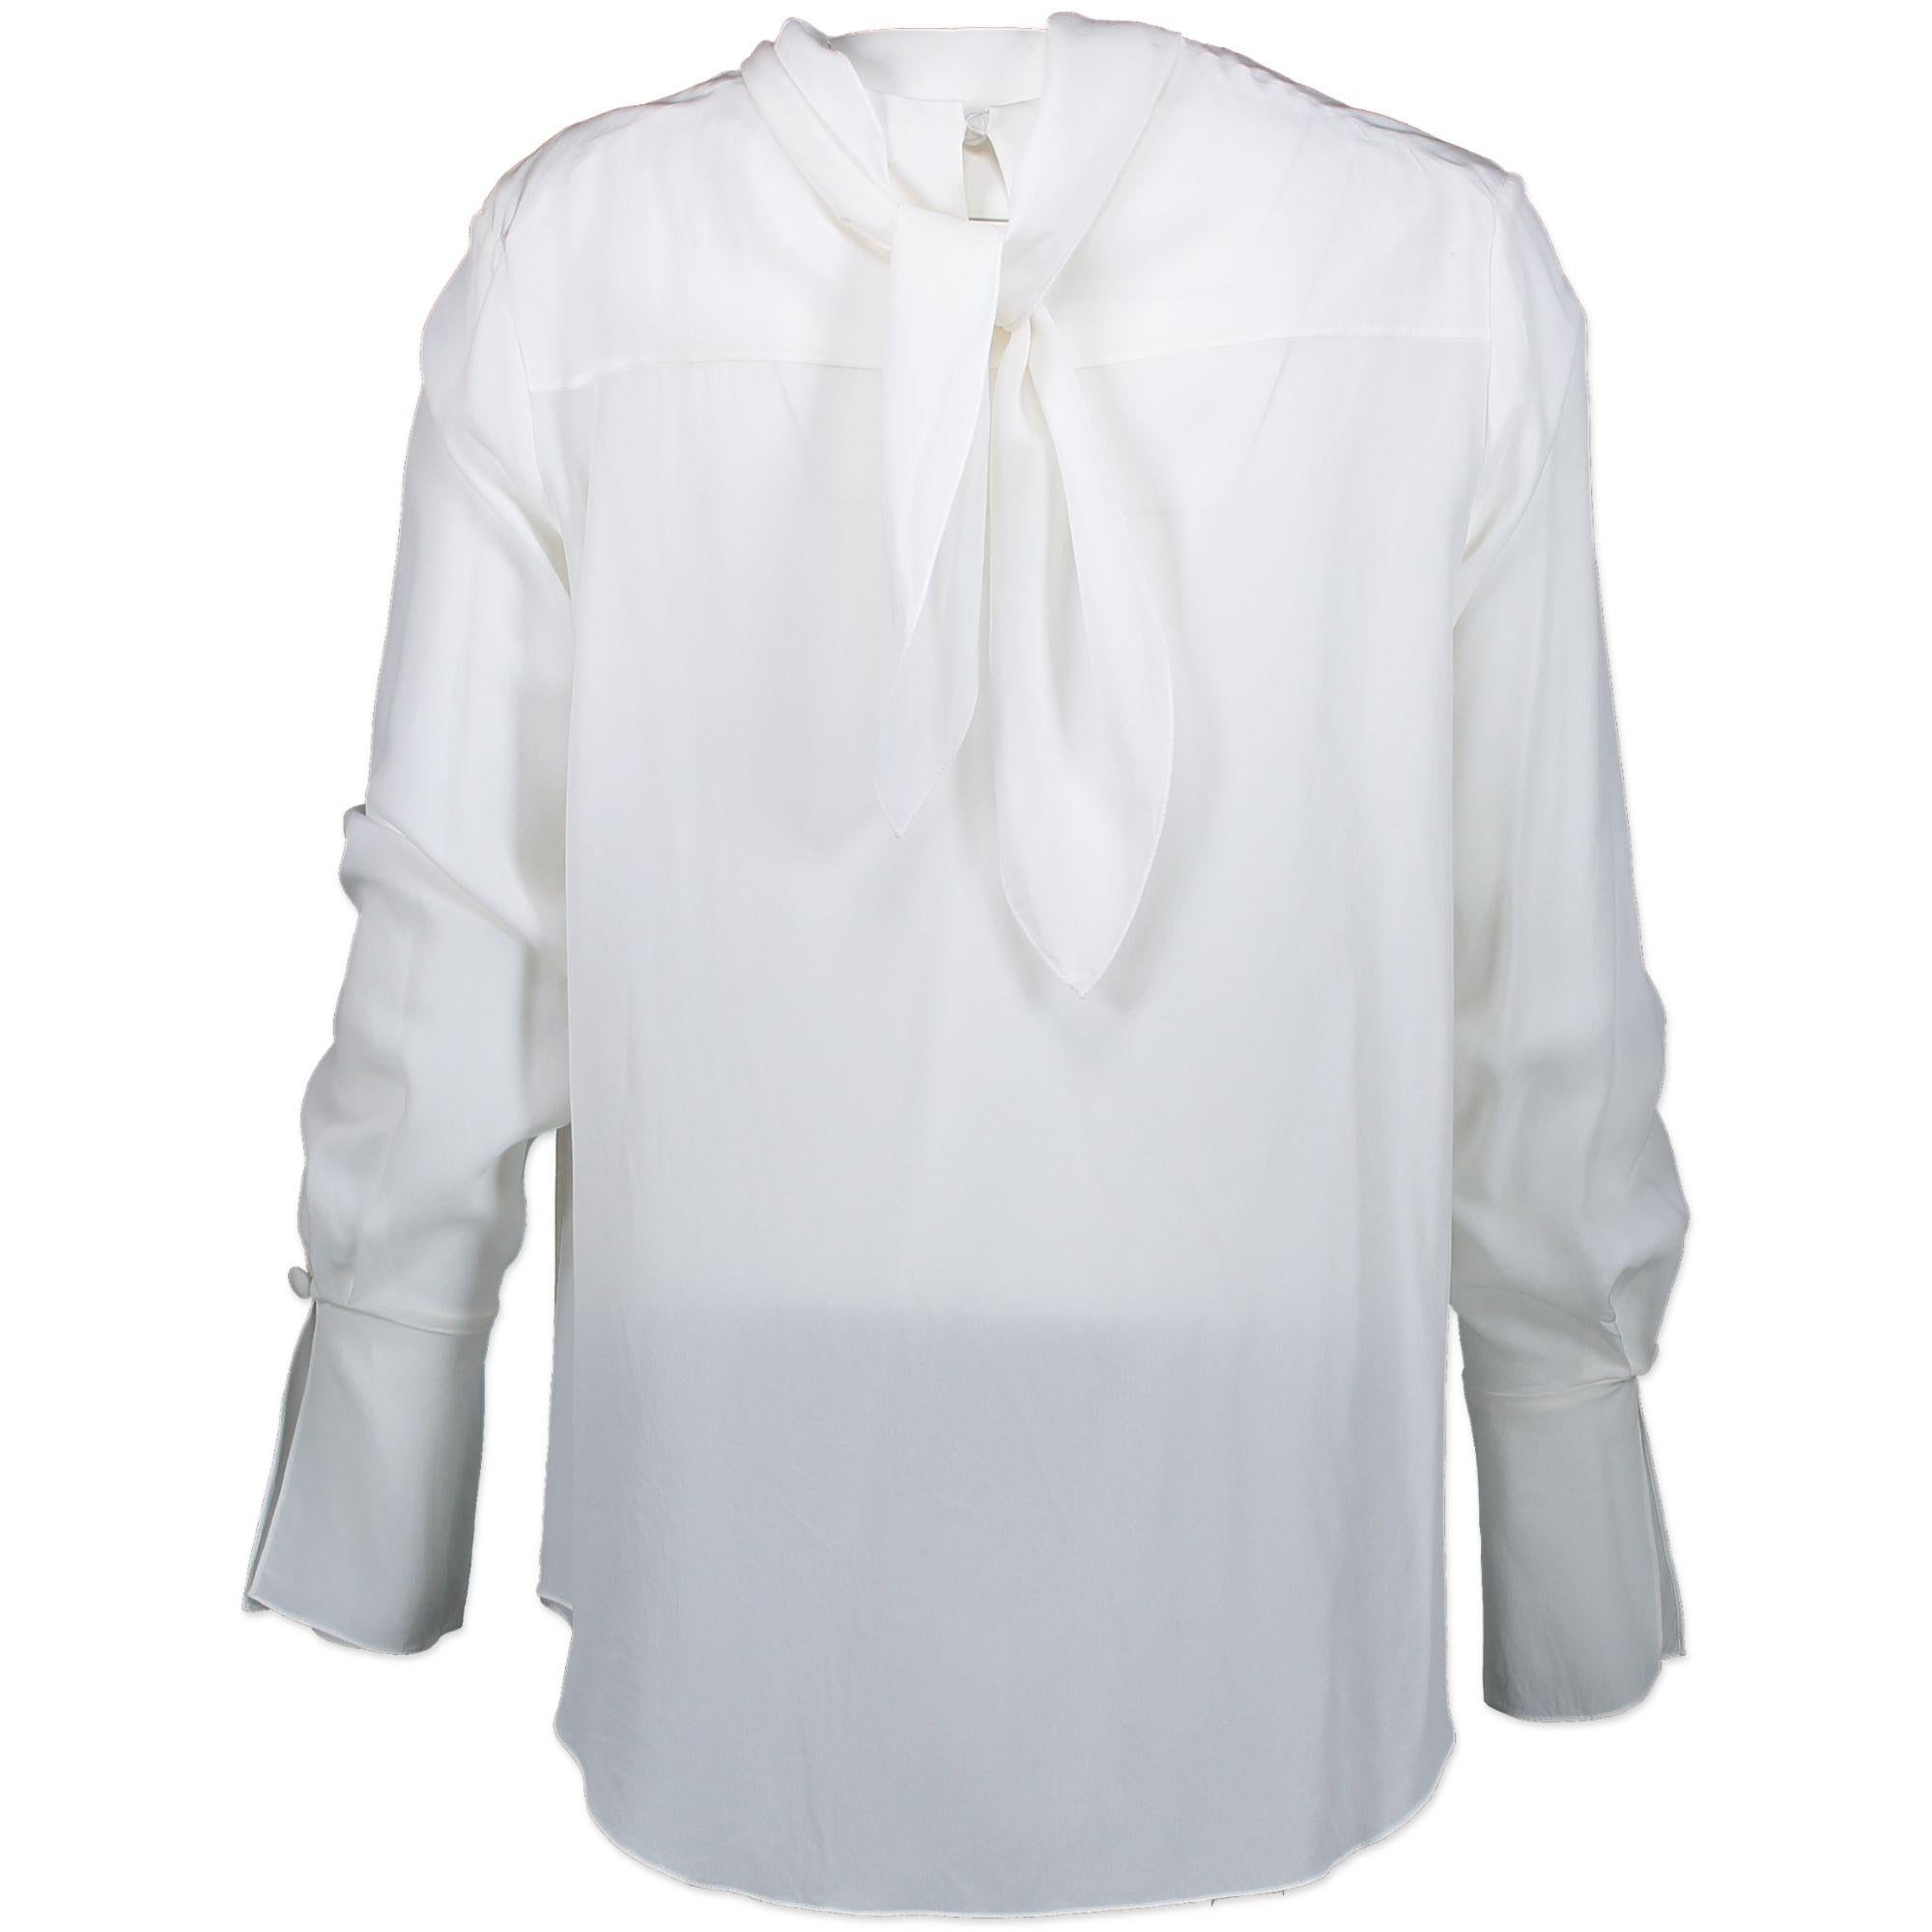 Very good Condition

Chloé White Silk top - size 36

This beautiful white silk top by Chloé is the perfect top to combine with almost all your summer looks. The top has a bow on the back, and is a little transparant.